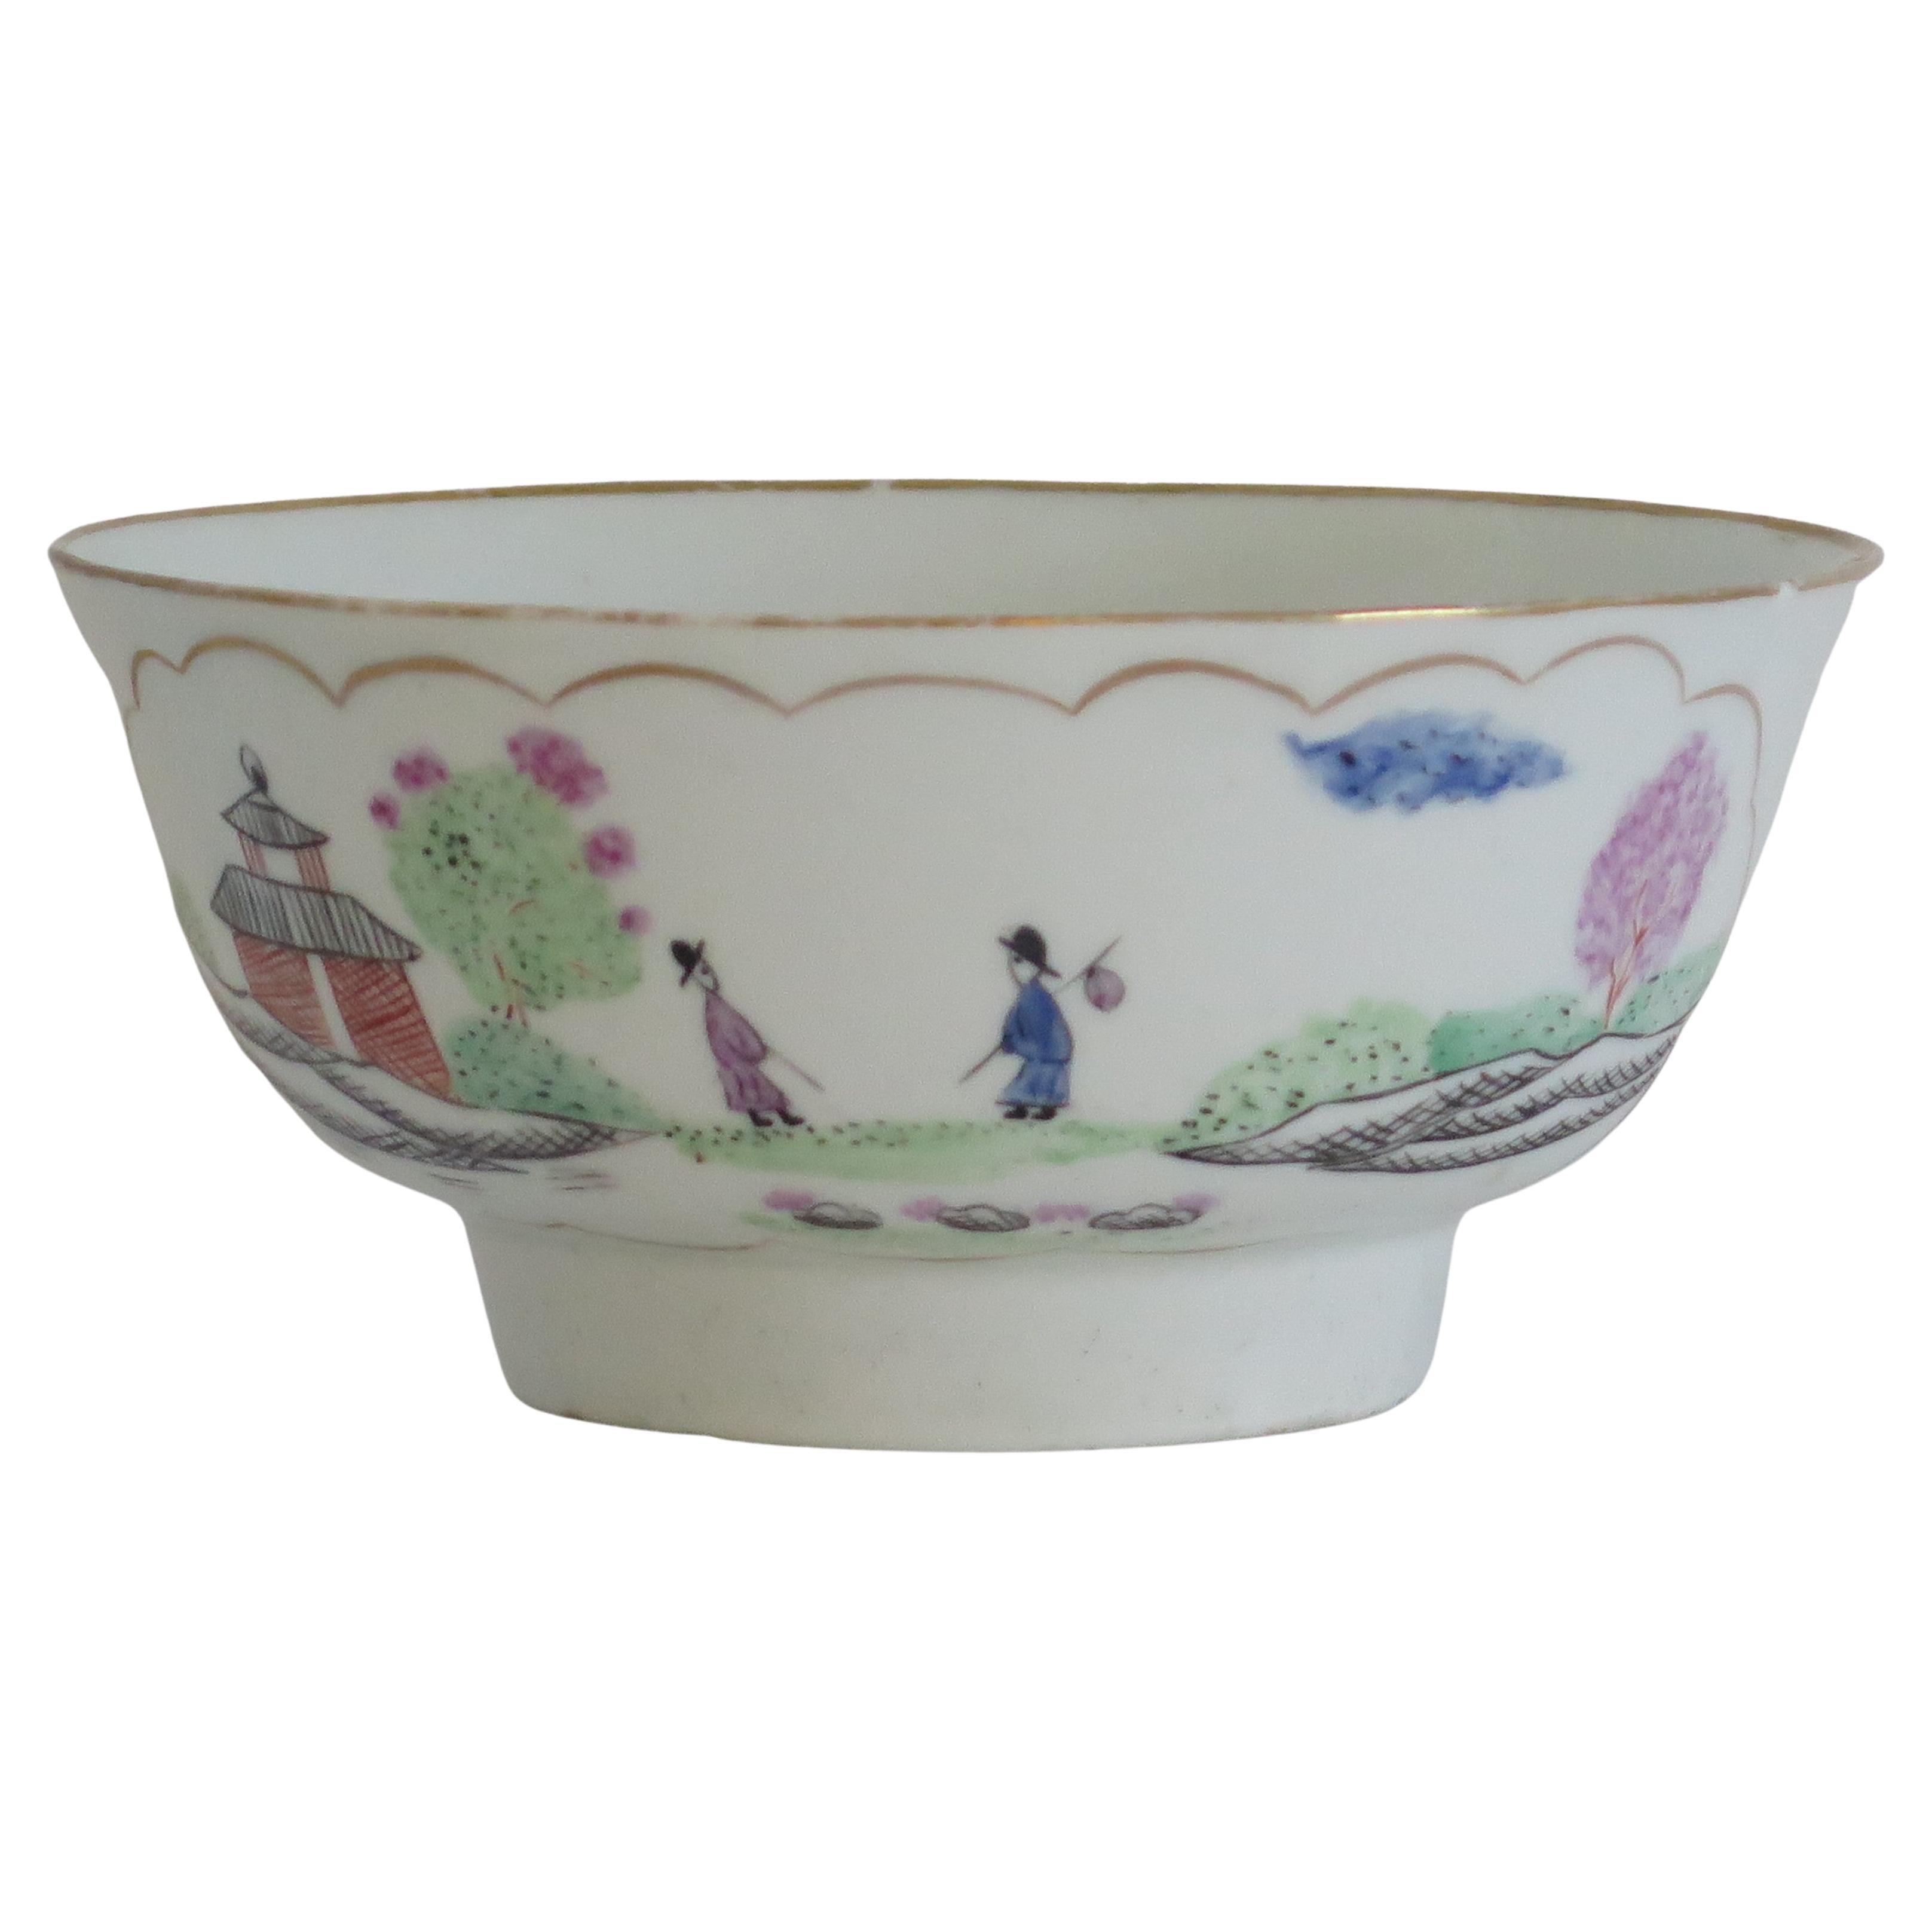 Chamberlains Worcester Porcelain Slop Bowl in Stag Hunt Pattern No.9, circa 1792